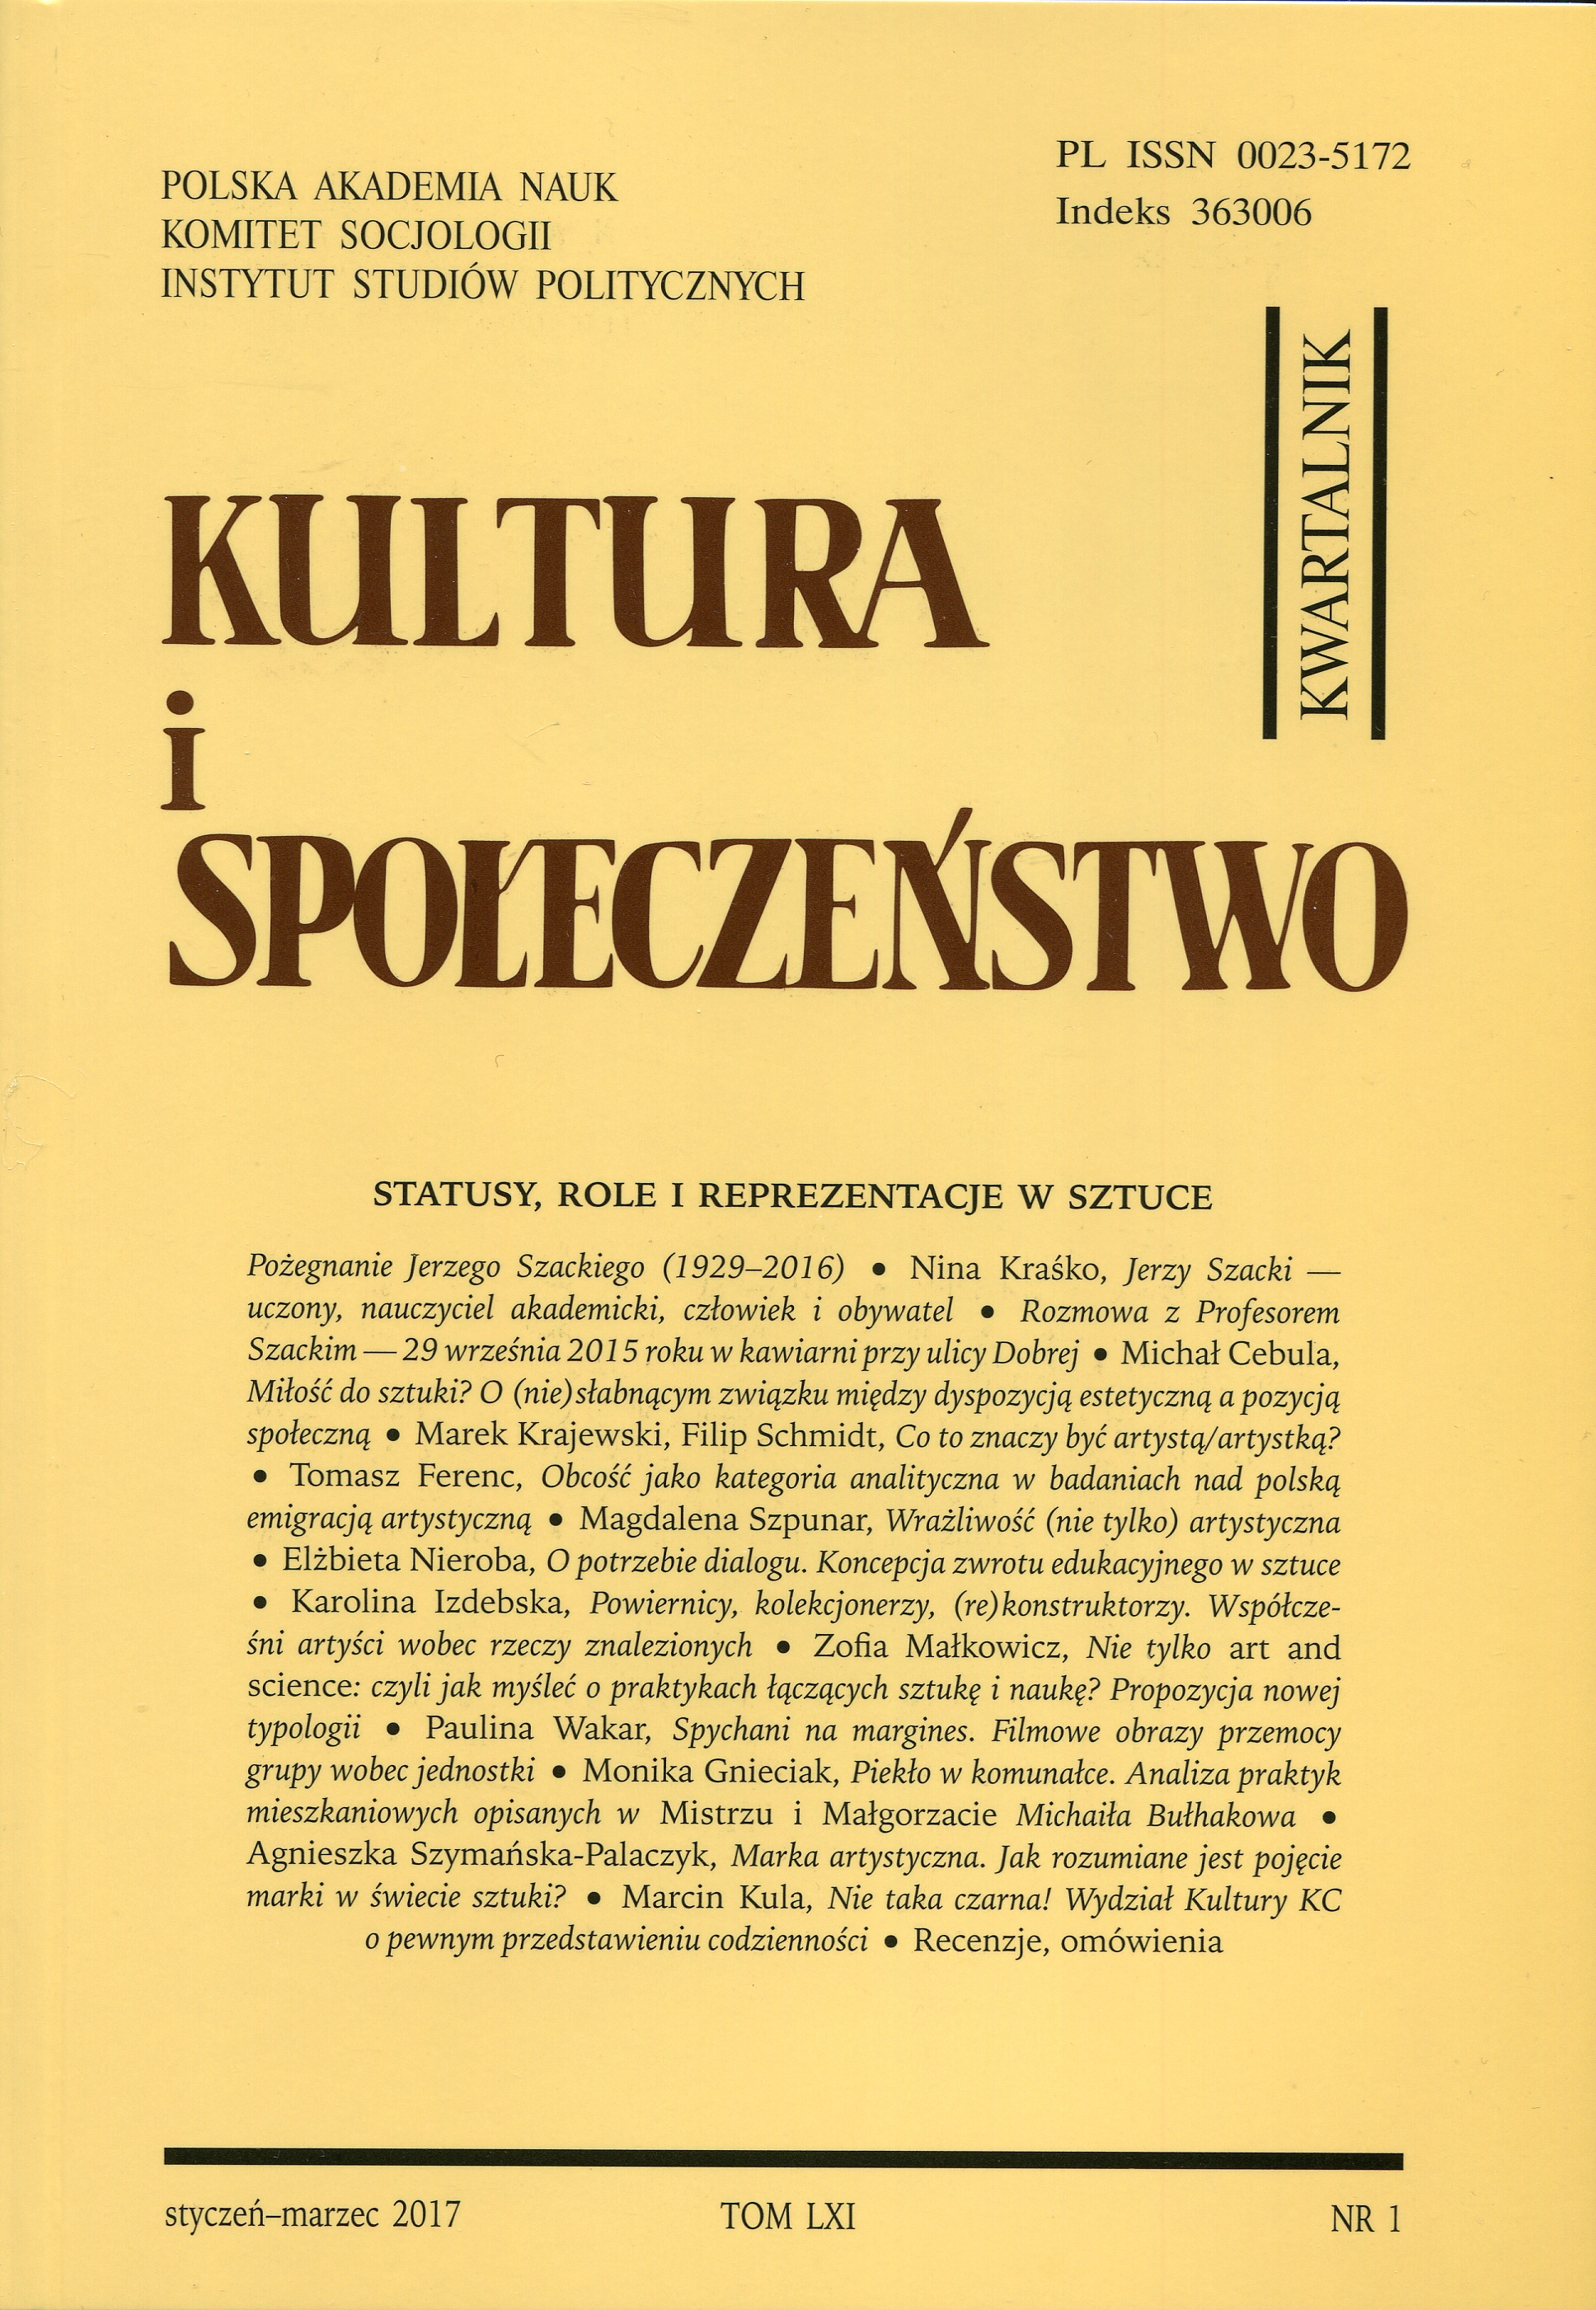 Otherness as an Analytical Category in Studying Polish Emigré Artists Cover Image